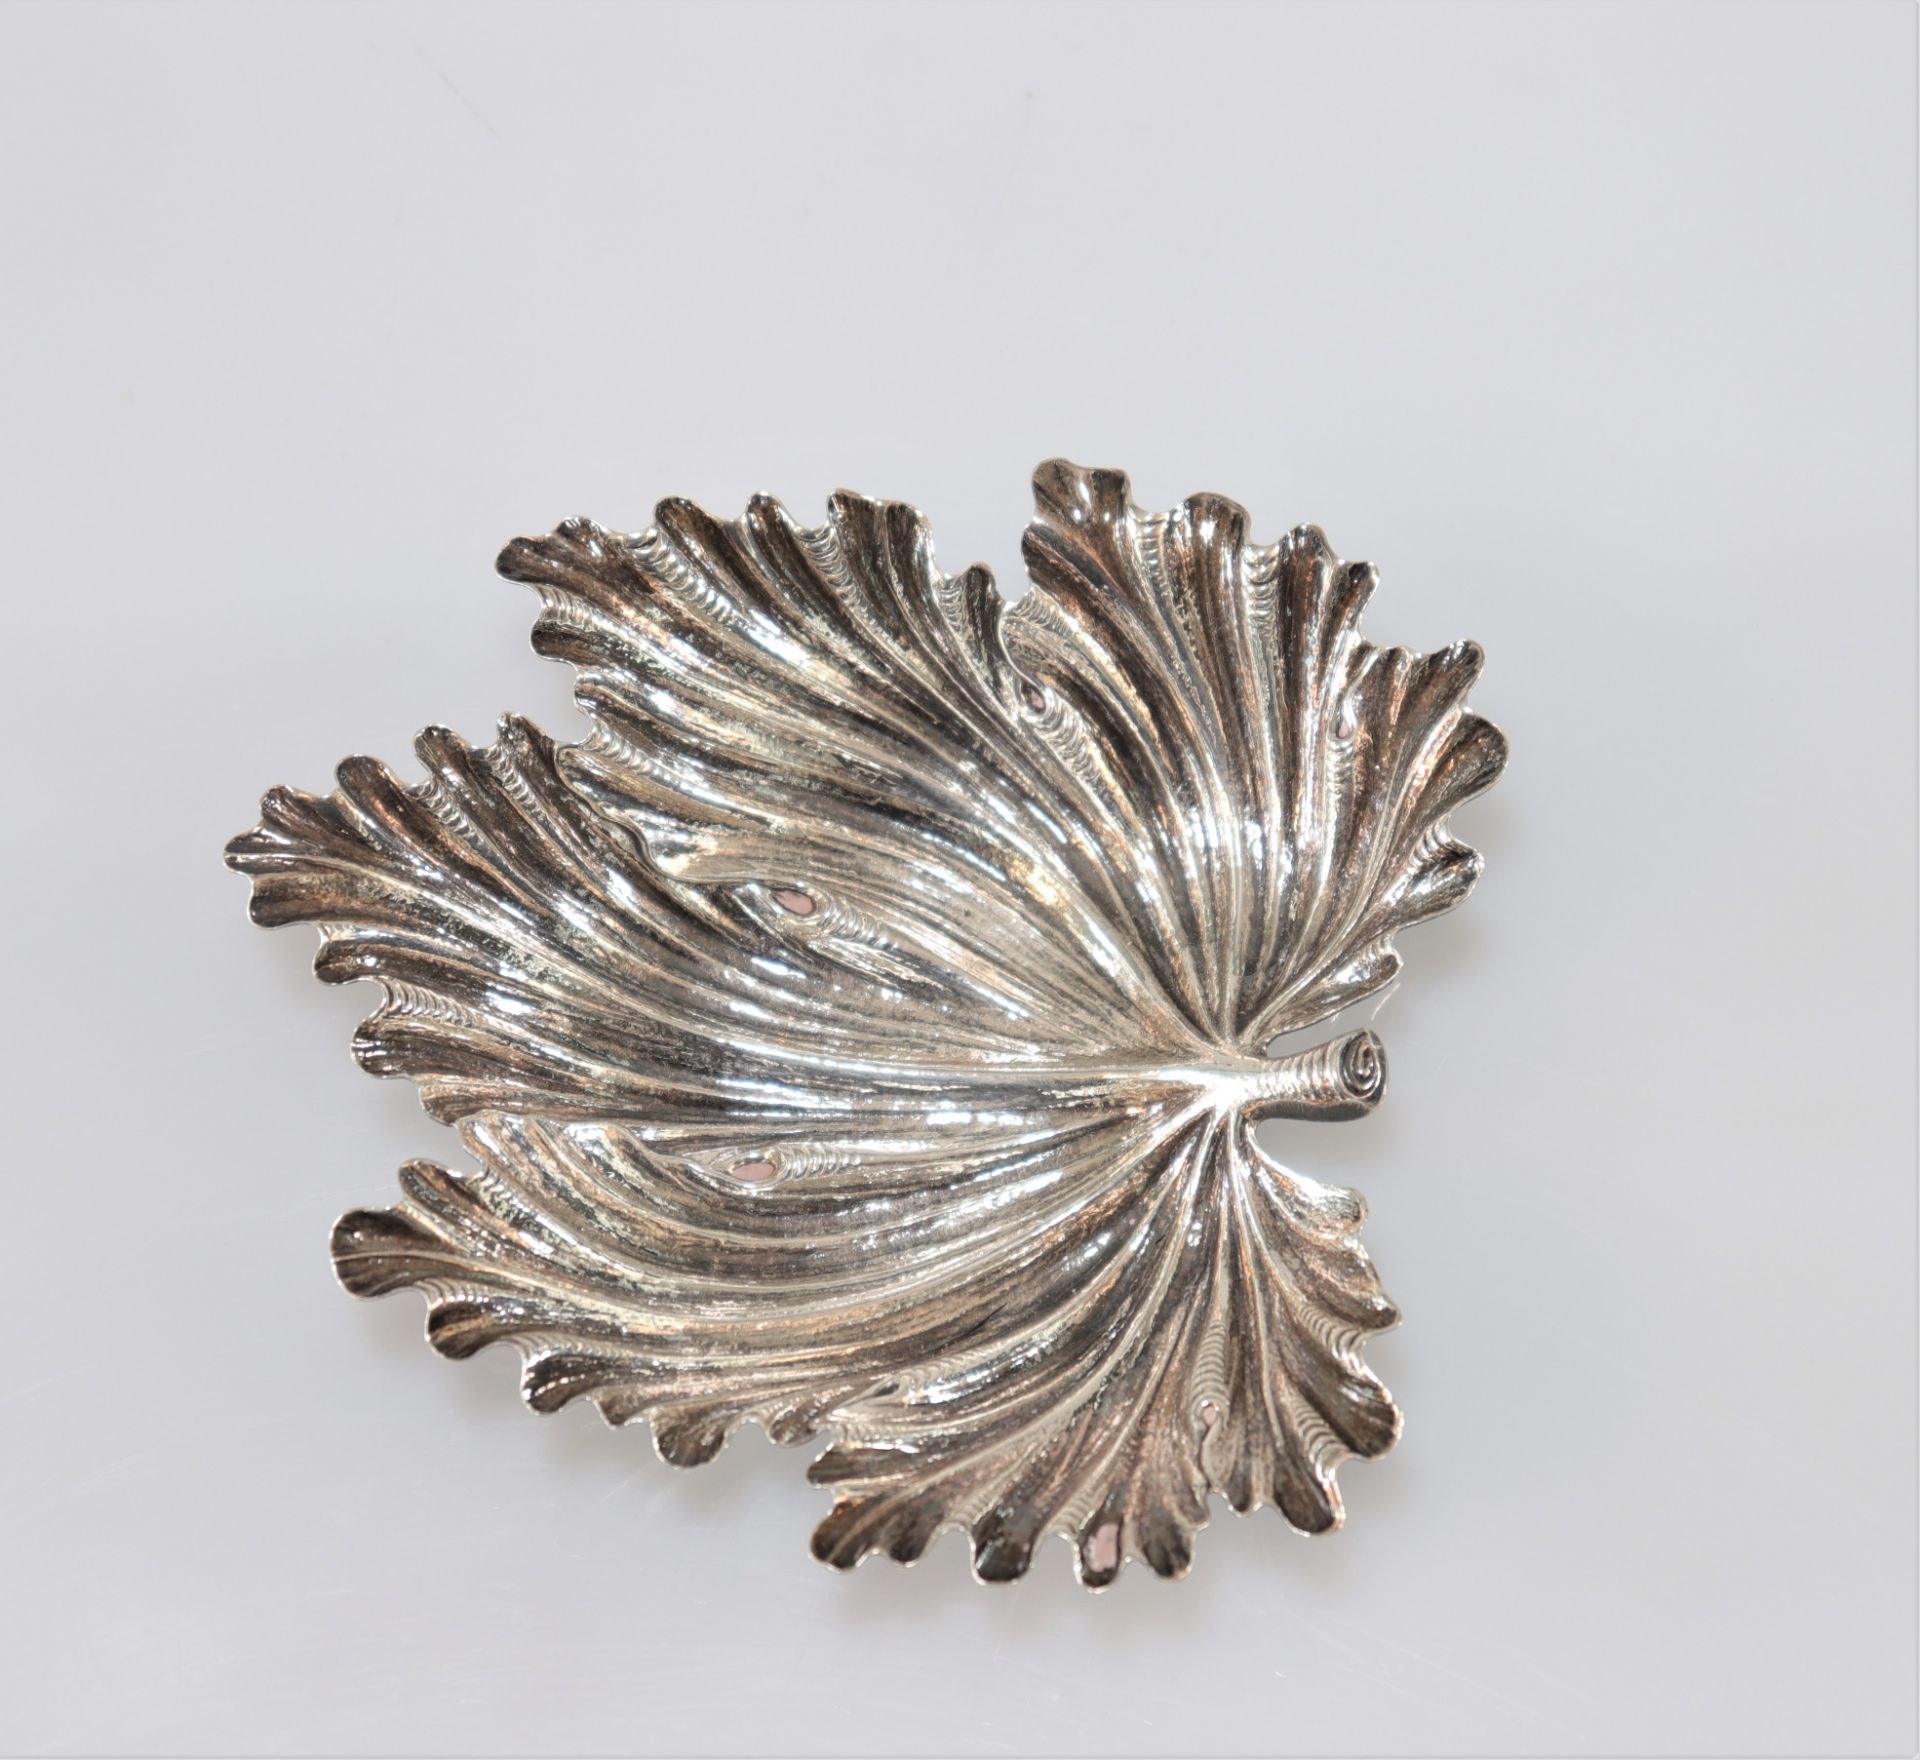 BUCCELLATI set (12pc) of solid 925 silver table decorations - Image 6 of 10